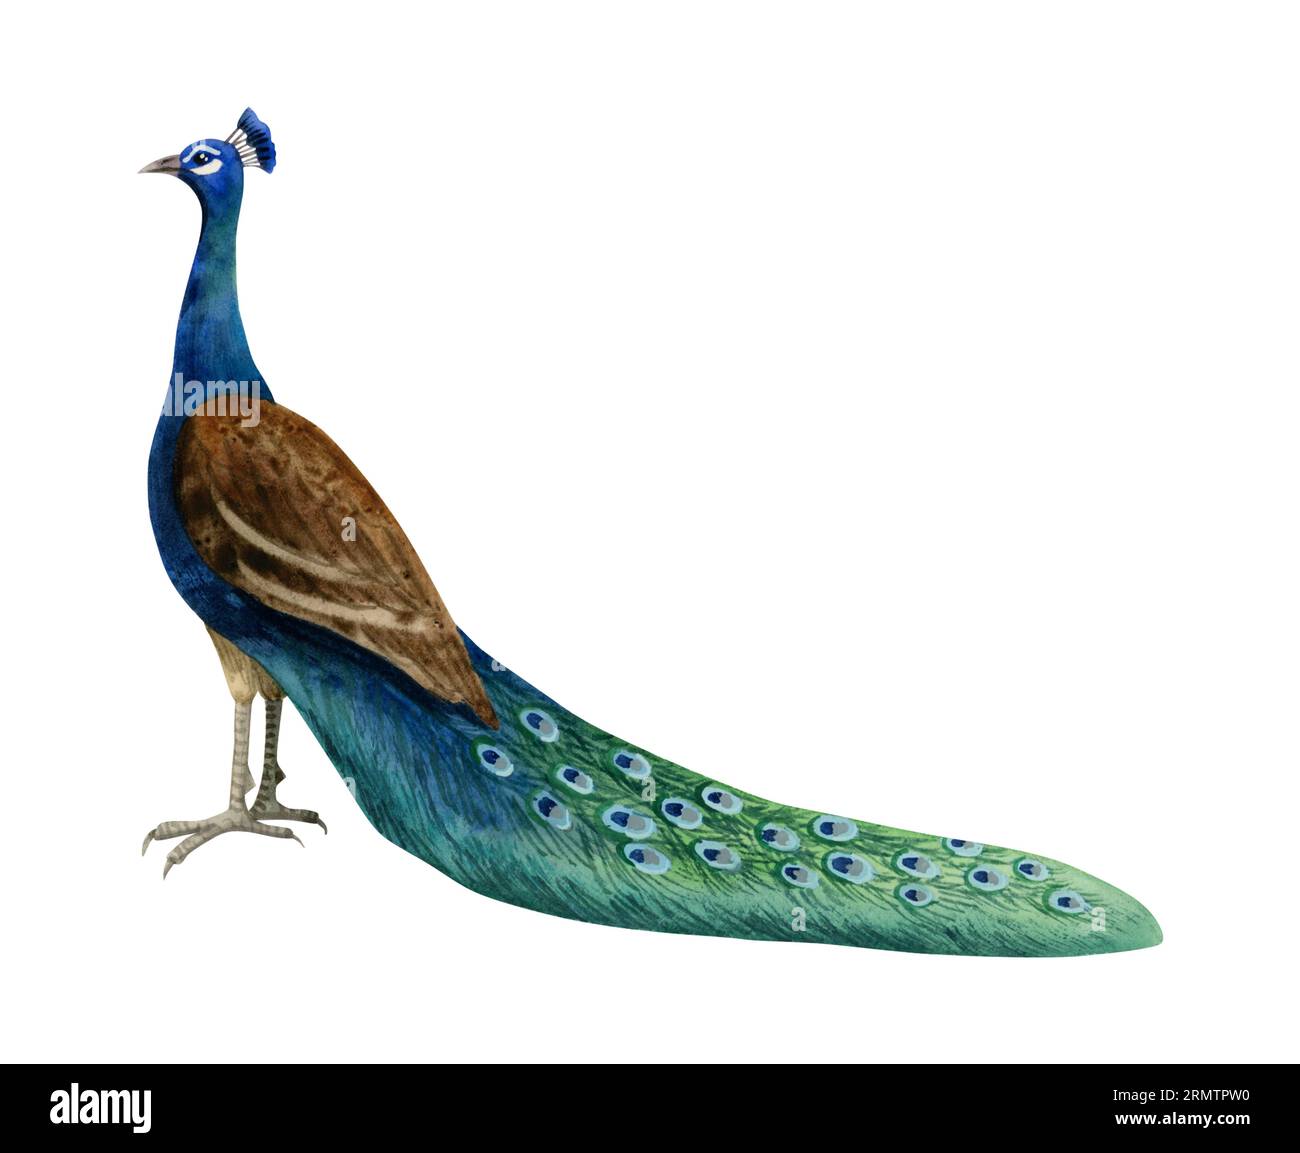 Peacock bird with colorful long tail watercolor illustration. Tropical nature realistic detailed clipart Stock Photo